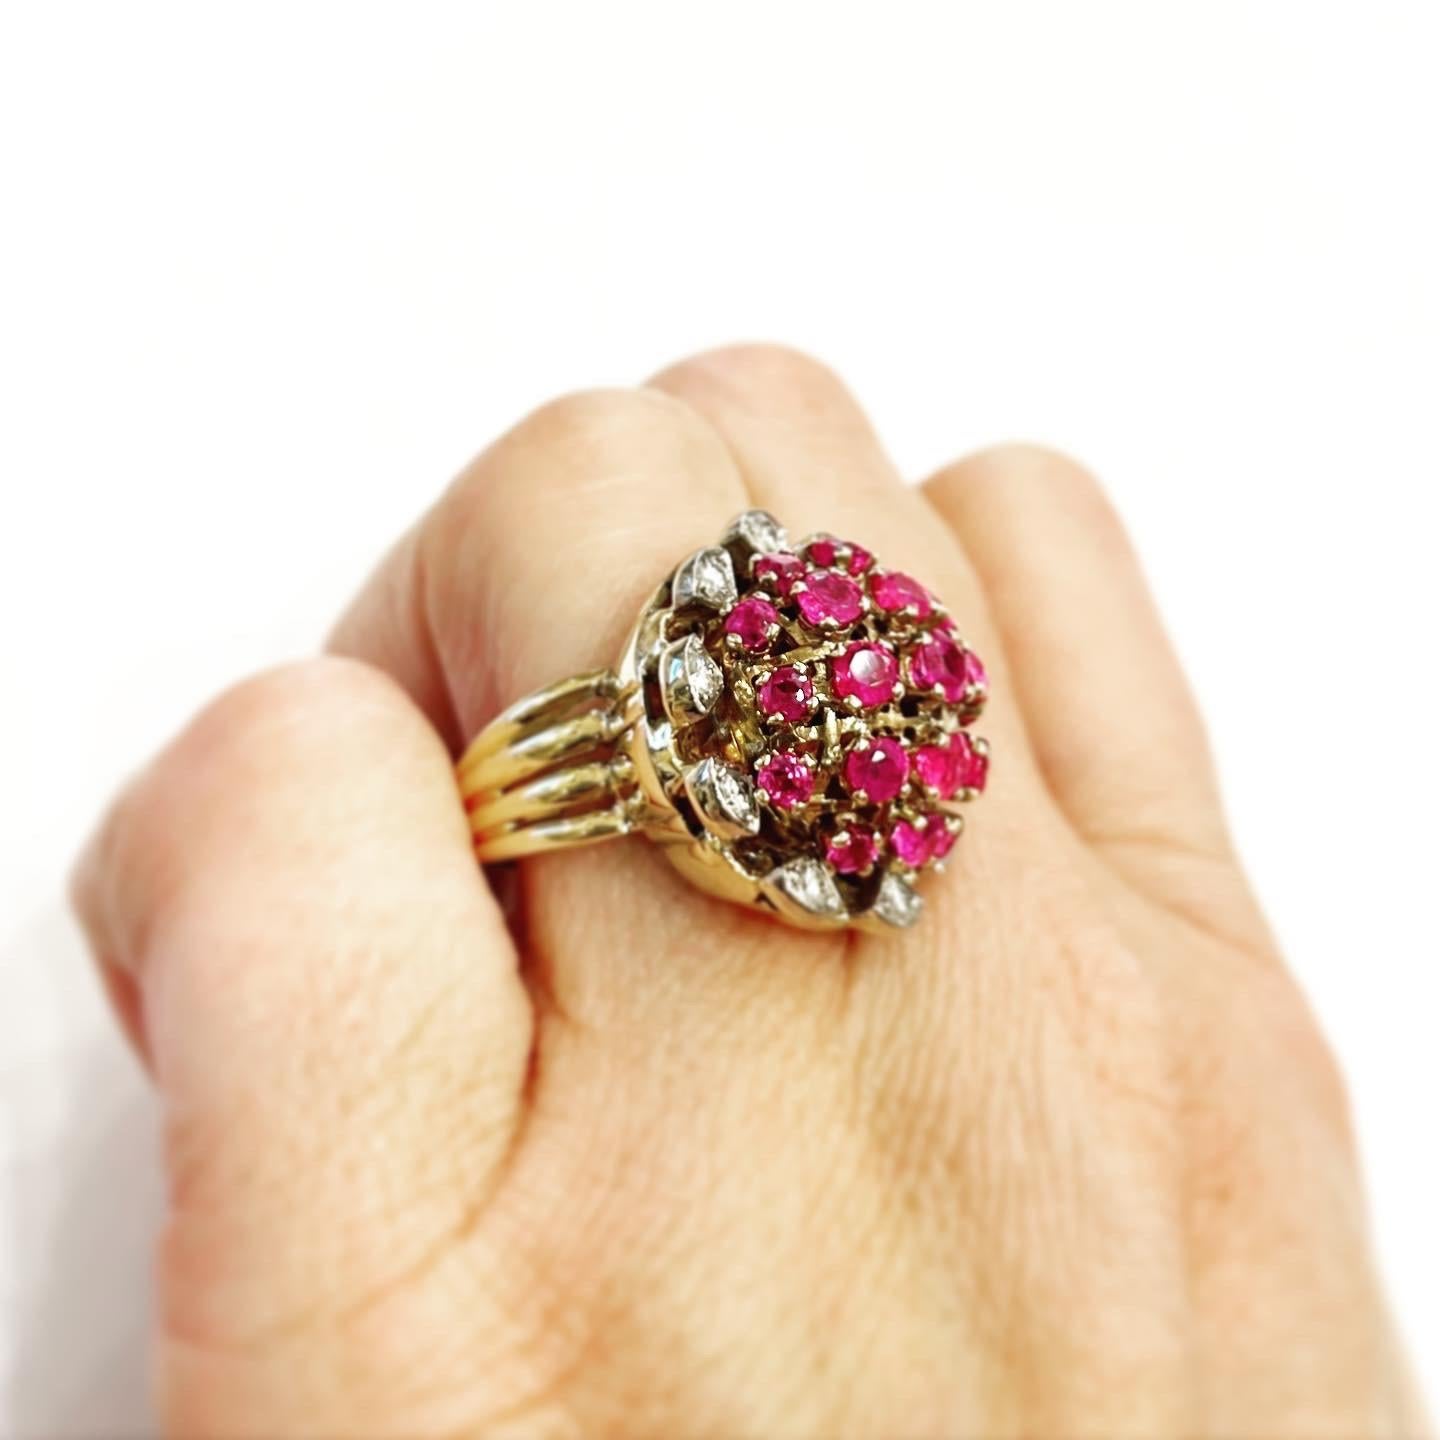 1950s Interchangeable 18kt Gold, Diamond, Pearls, Ruby, Sapphire Fashion Ring 6